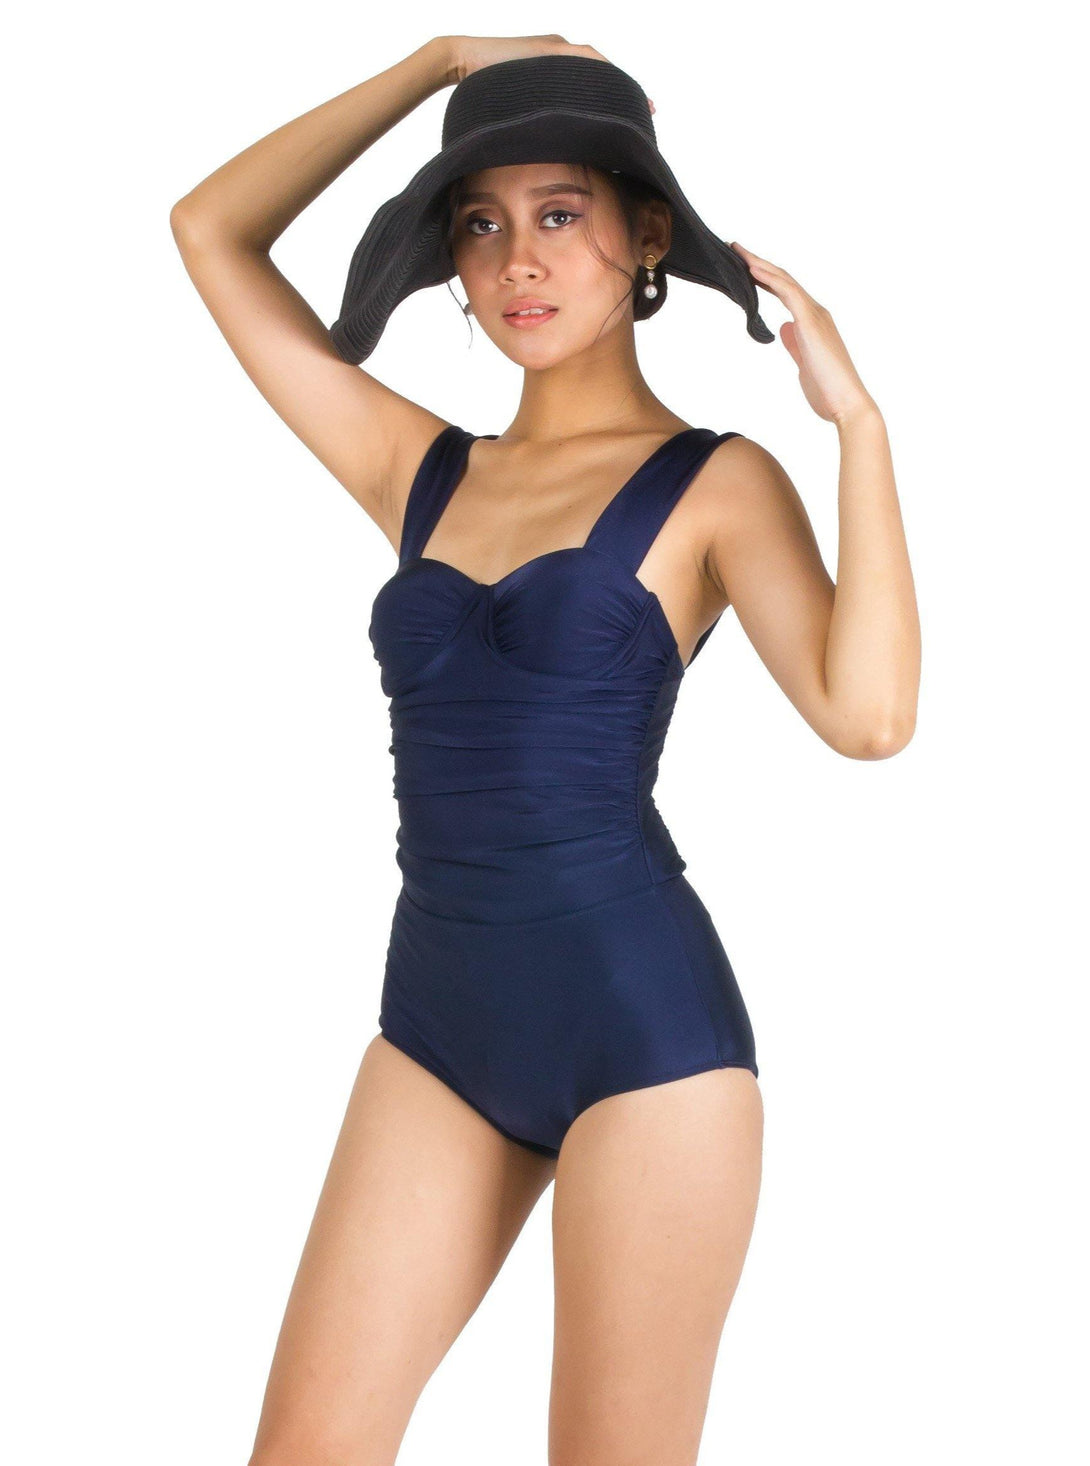 Louise Shaping Underwire Retro Swimsuit in Navy Blue - Pink N' Proper